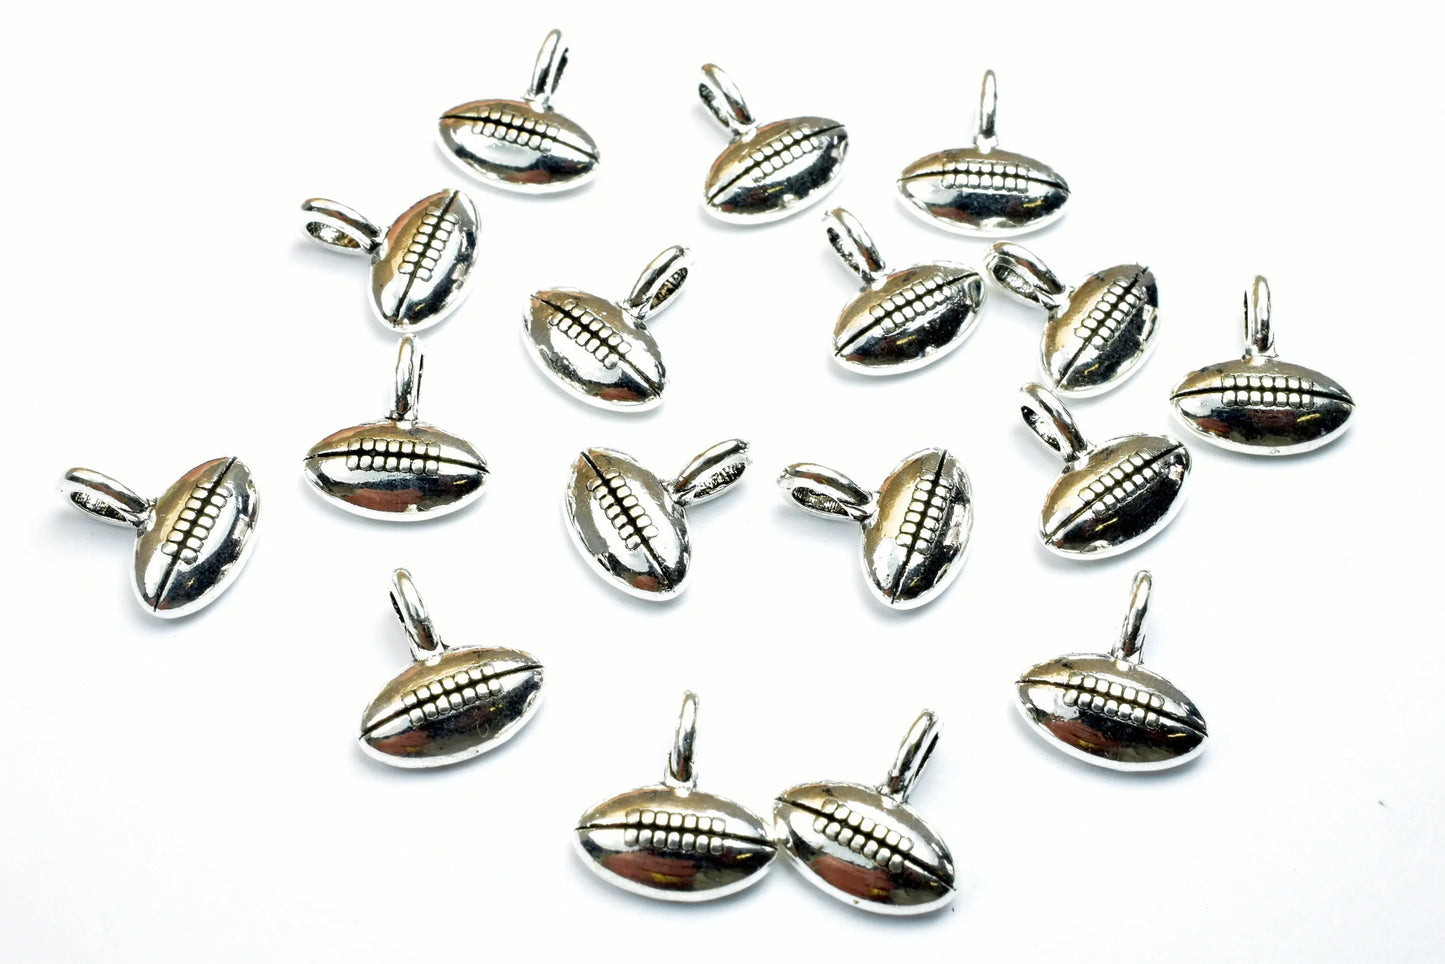 American Football Sport Charms Size 11.5x10.5mm Silver Color Charm Pendant Finding For Jewelry Making 18PCs/PK - BeadsFindingDepot